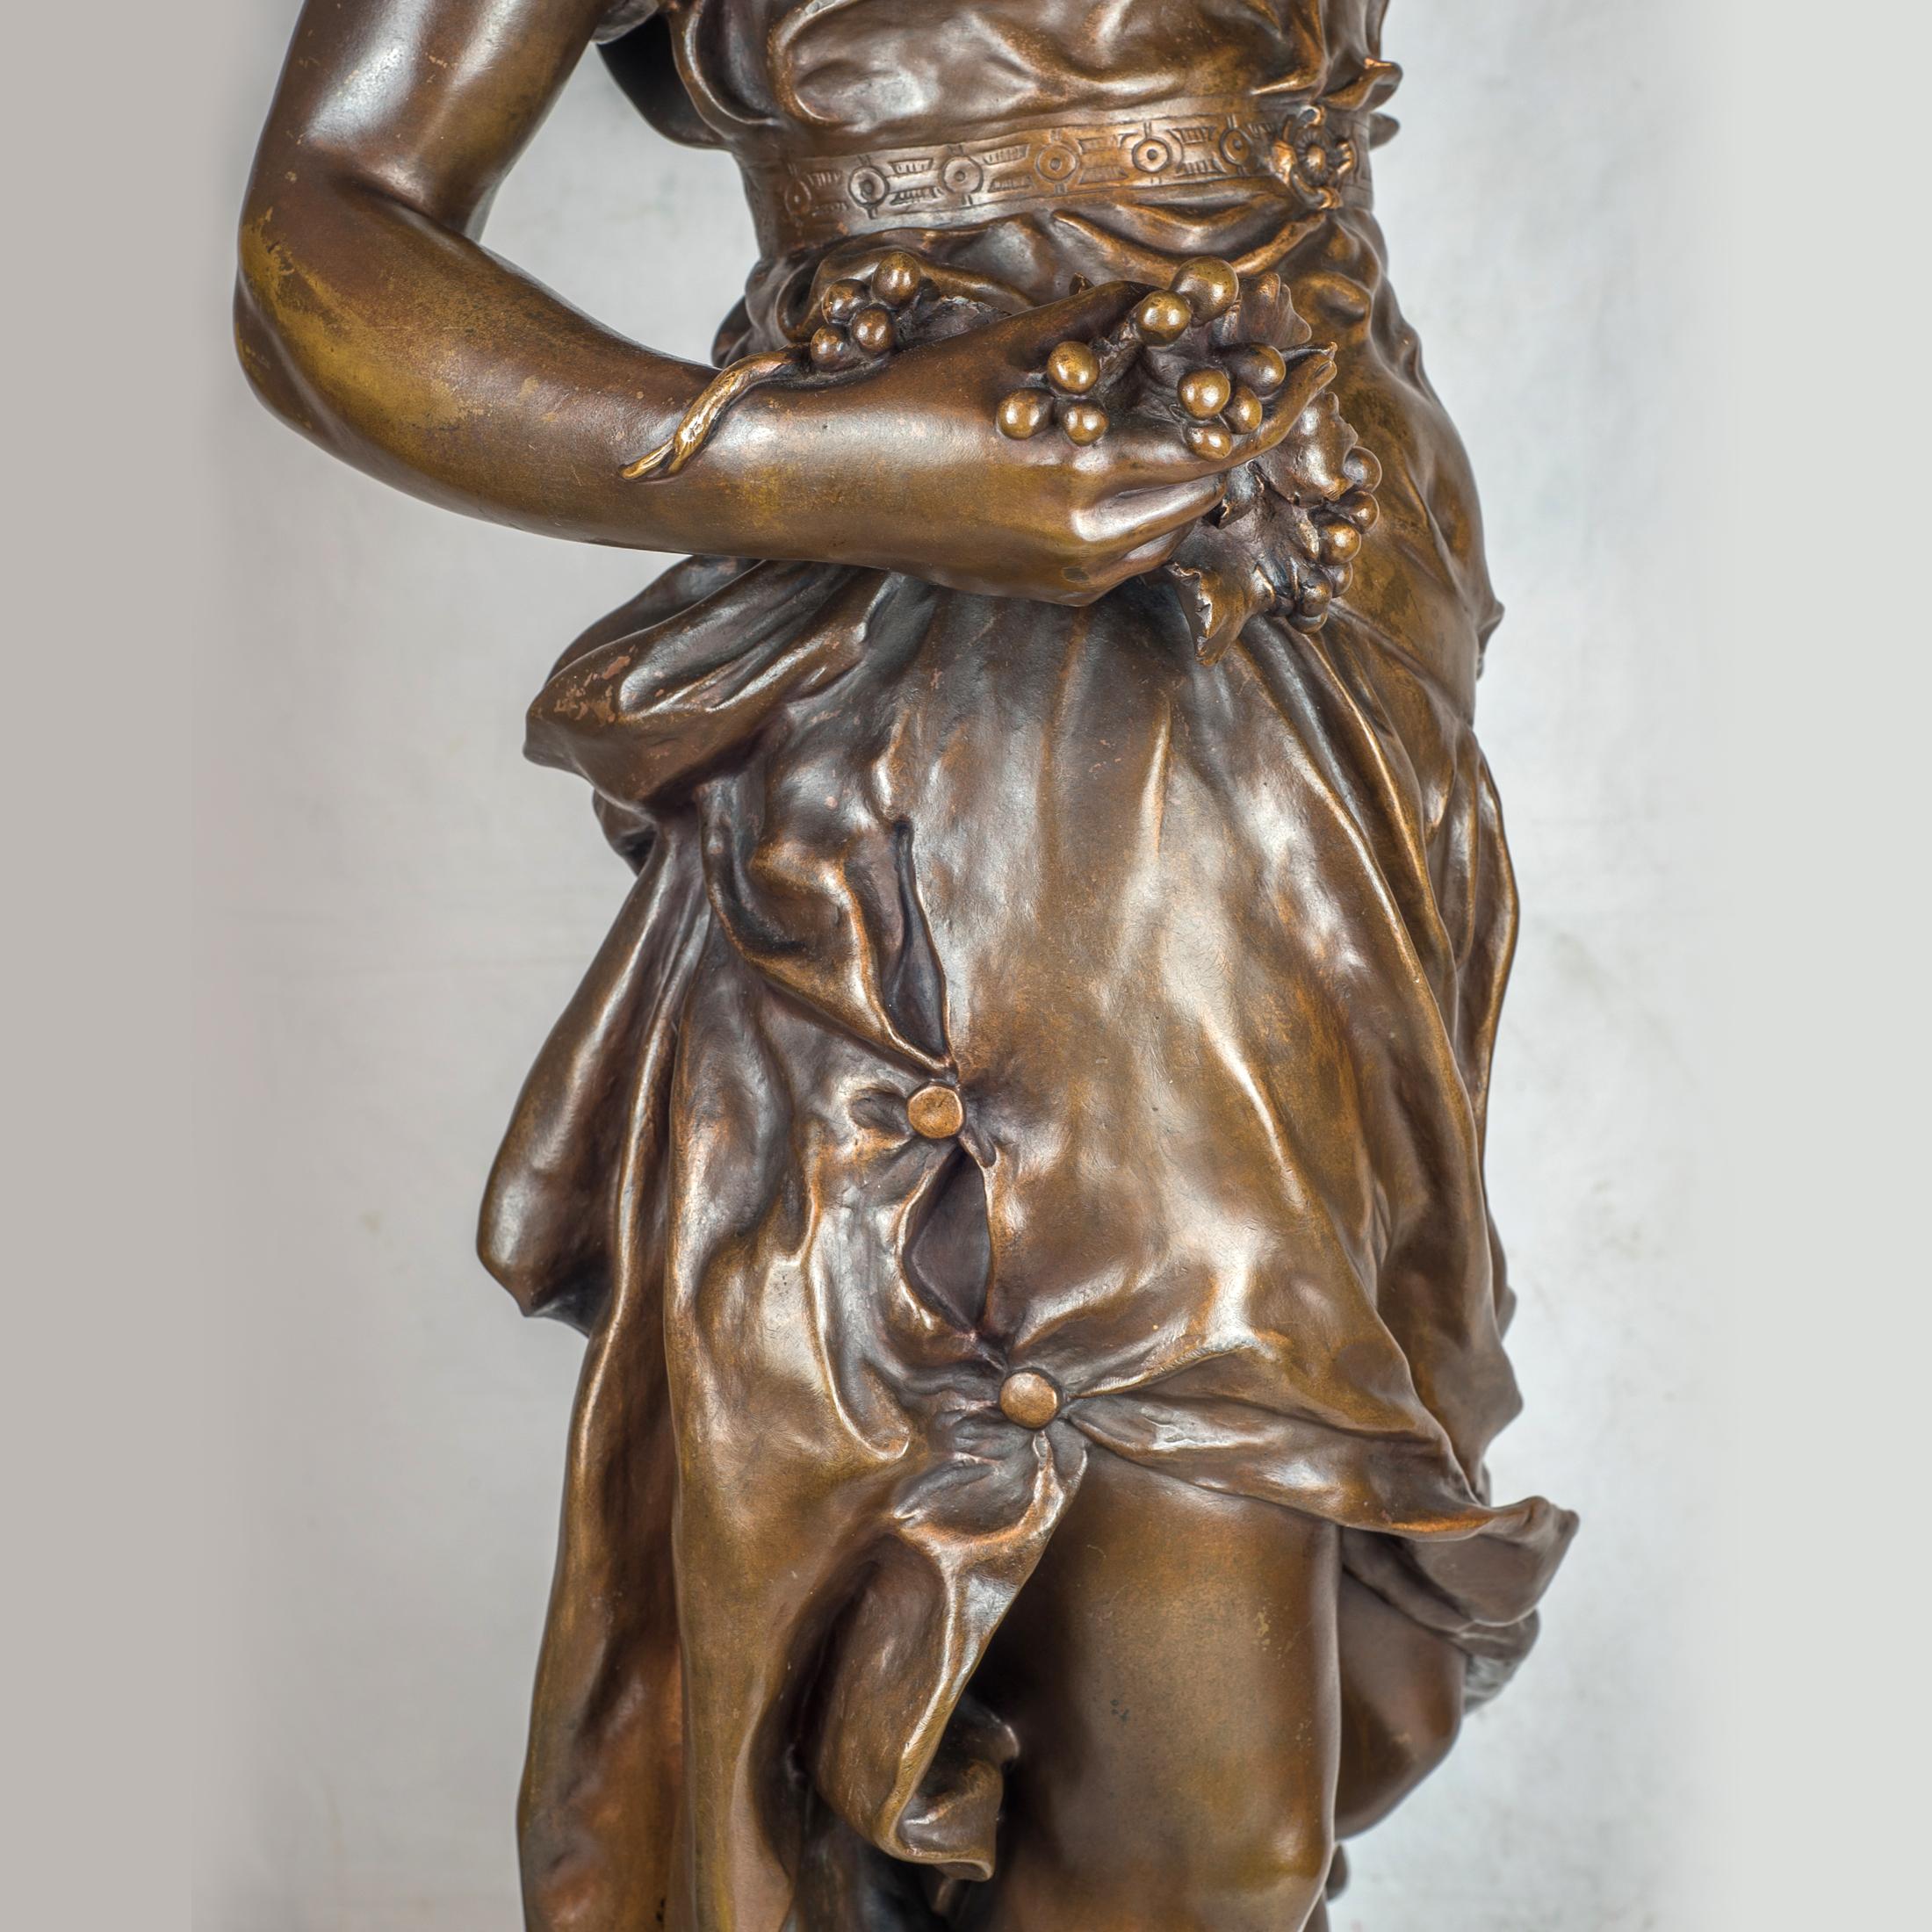 CLÉMENT LÉOPOLD STEINER 
French, (1853-1899)

A Maiden in Classical Gown 

Patinated bronze; Signed ‘Steiner’   
46 1/8 x 22 1/2 x 14 inches